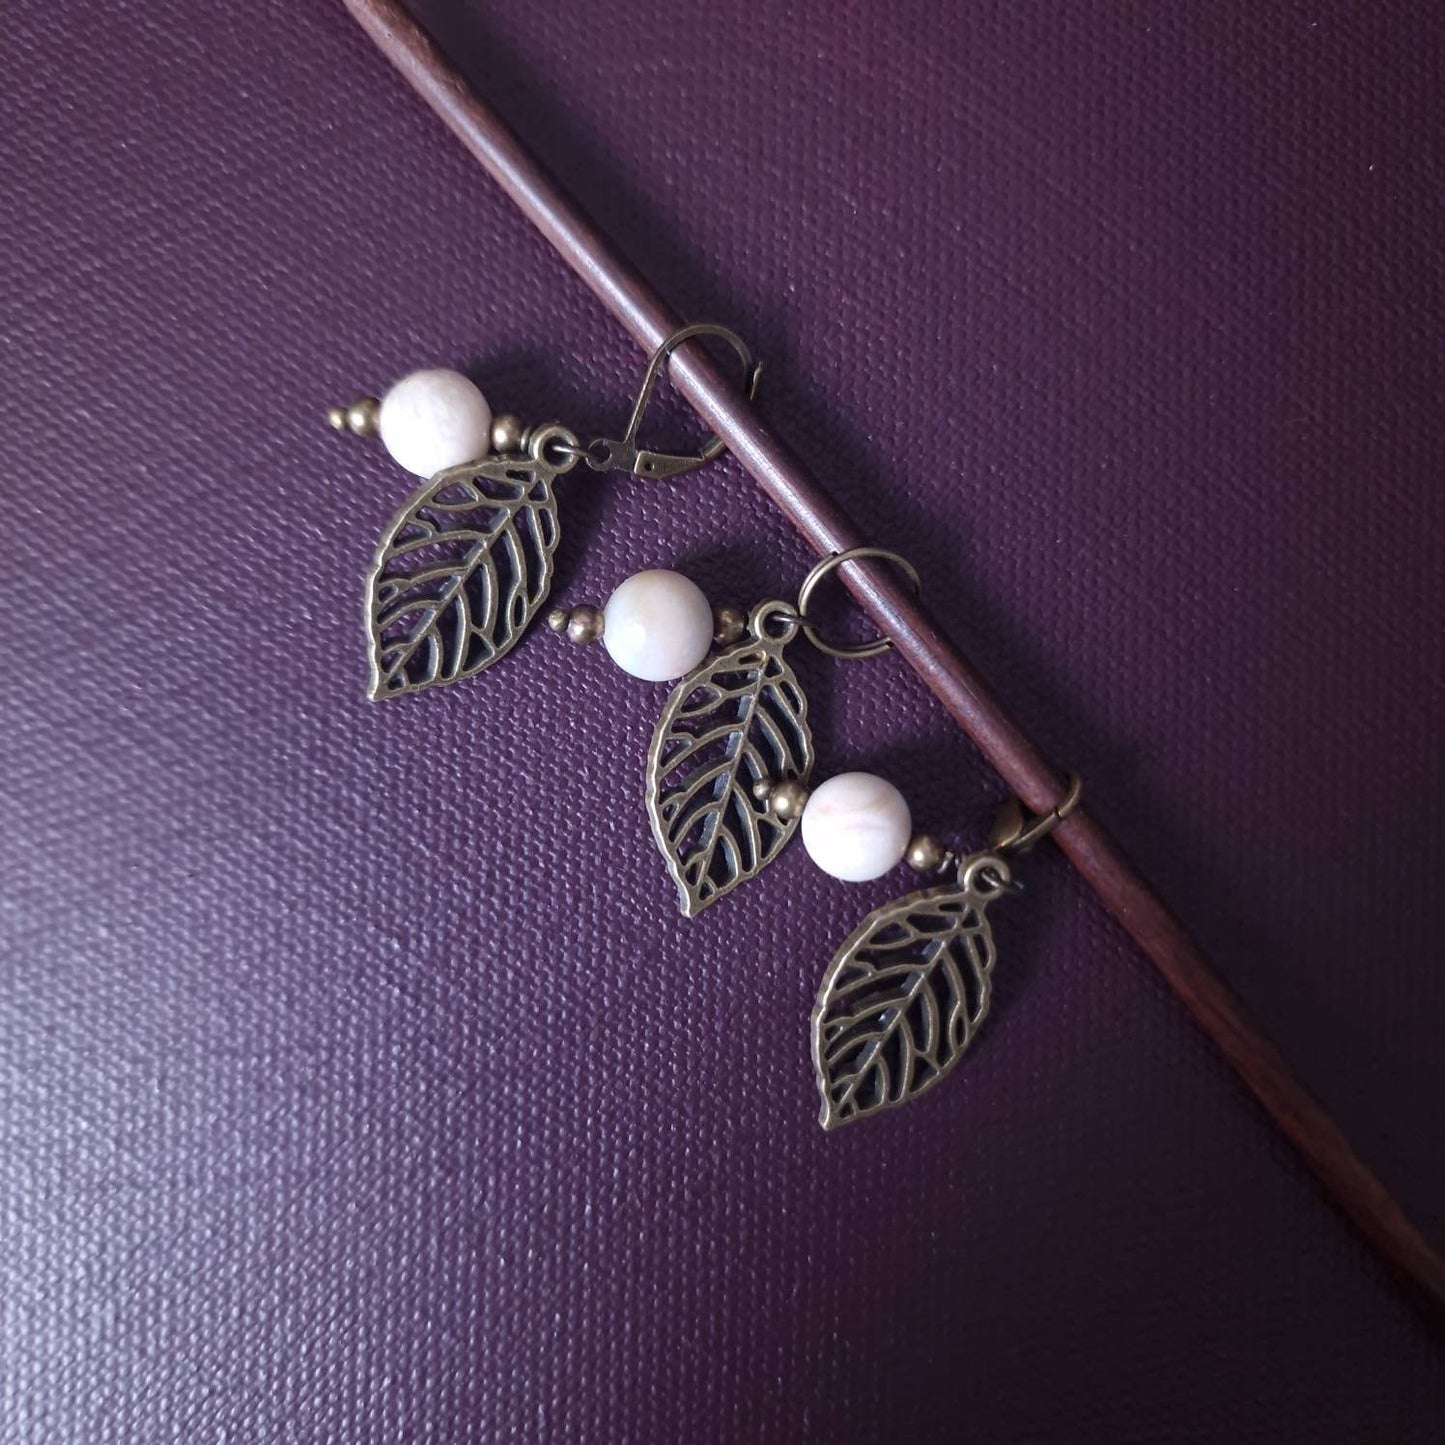 Stitch marker ~Leaf on the moon~ Knitting notions, progress markers, progress keepers, crochet notions, gift for knitter